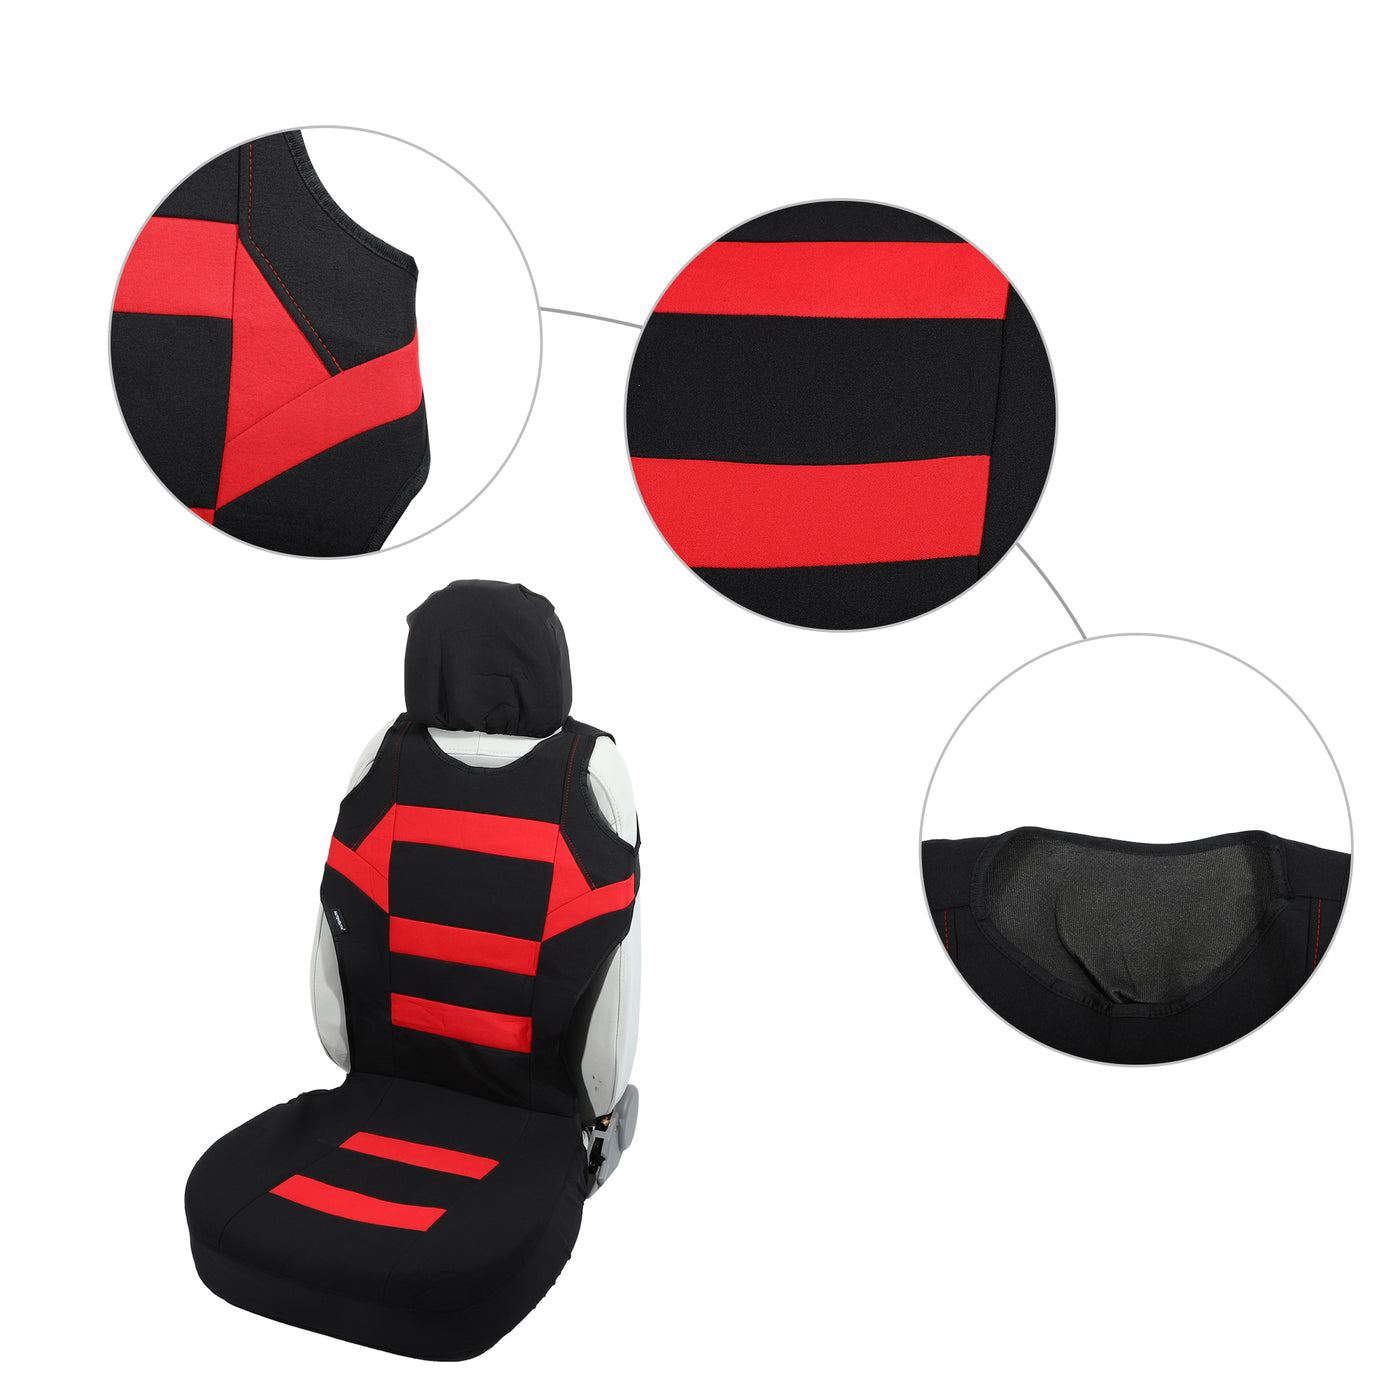 ACROPIX Front Car Seat Cover Universal Seat Protectors Seat Cushion Cover Red - Pack of 2